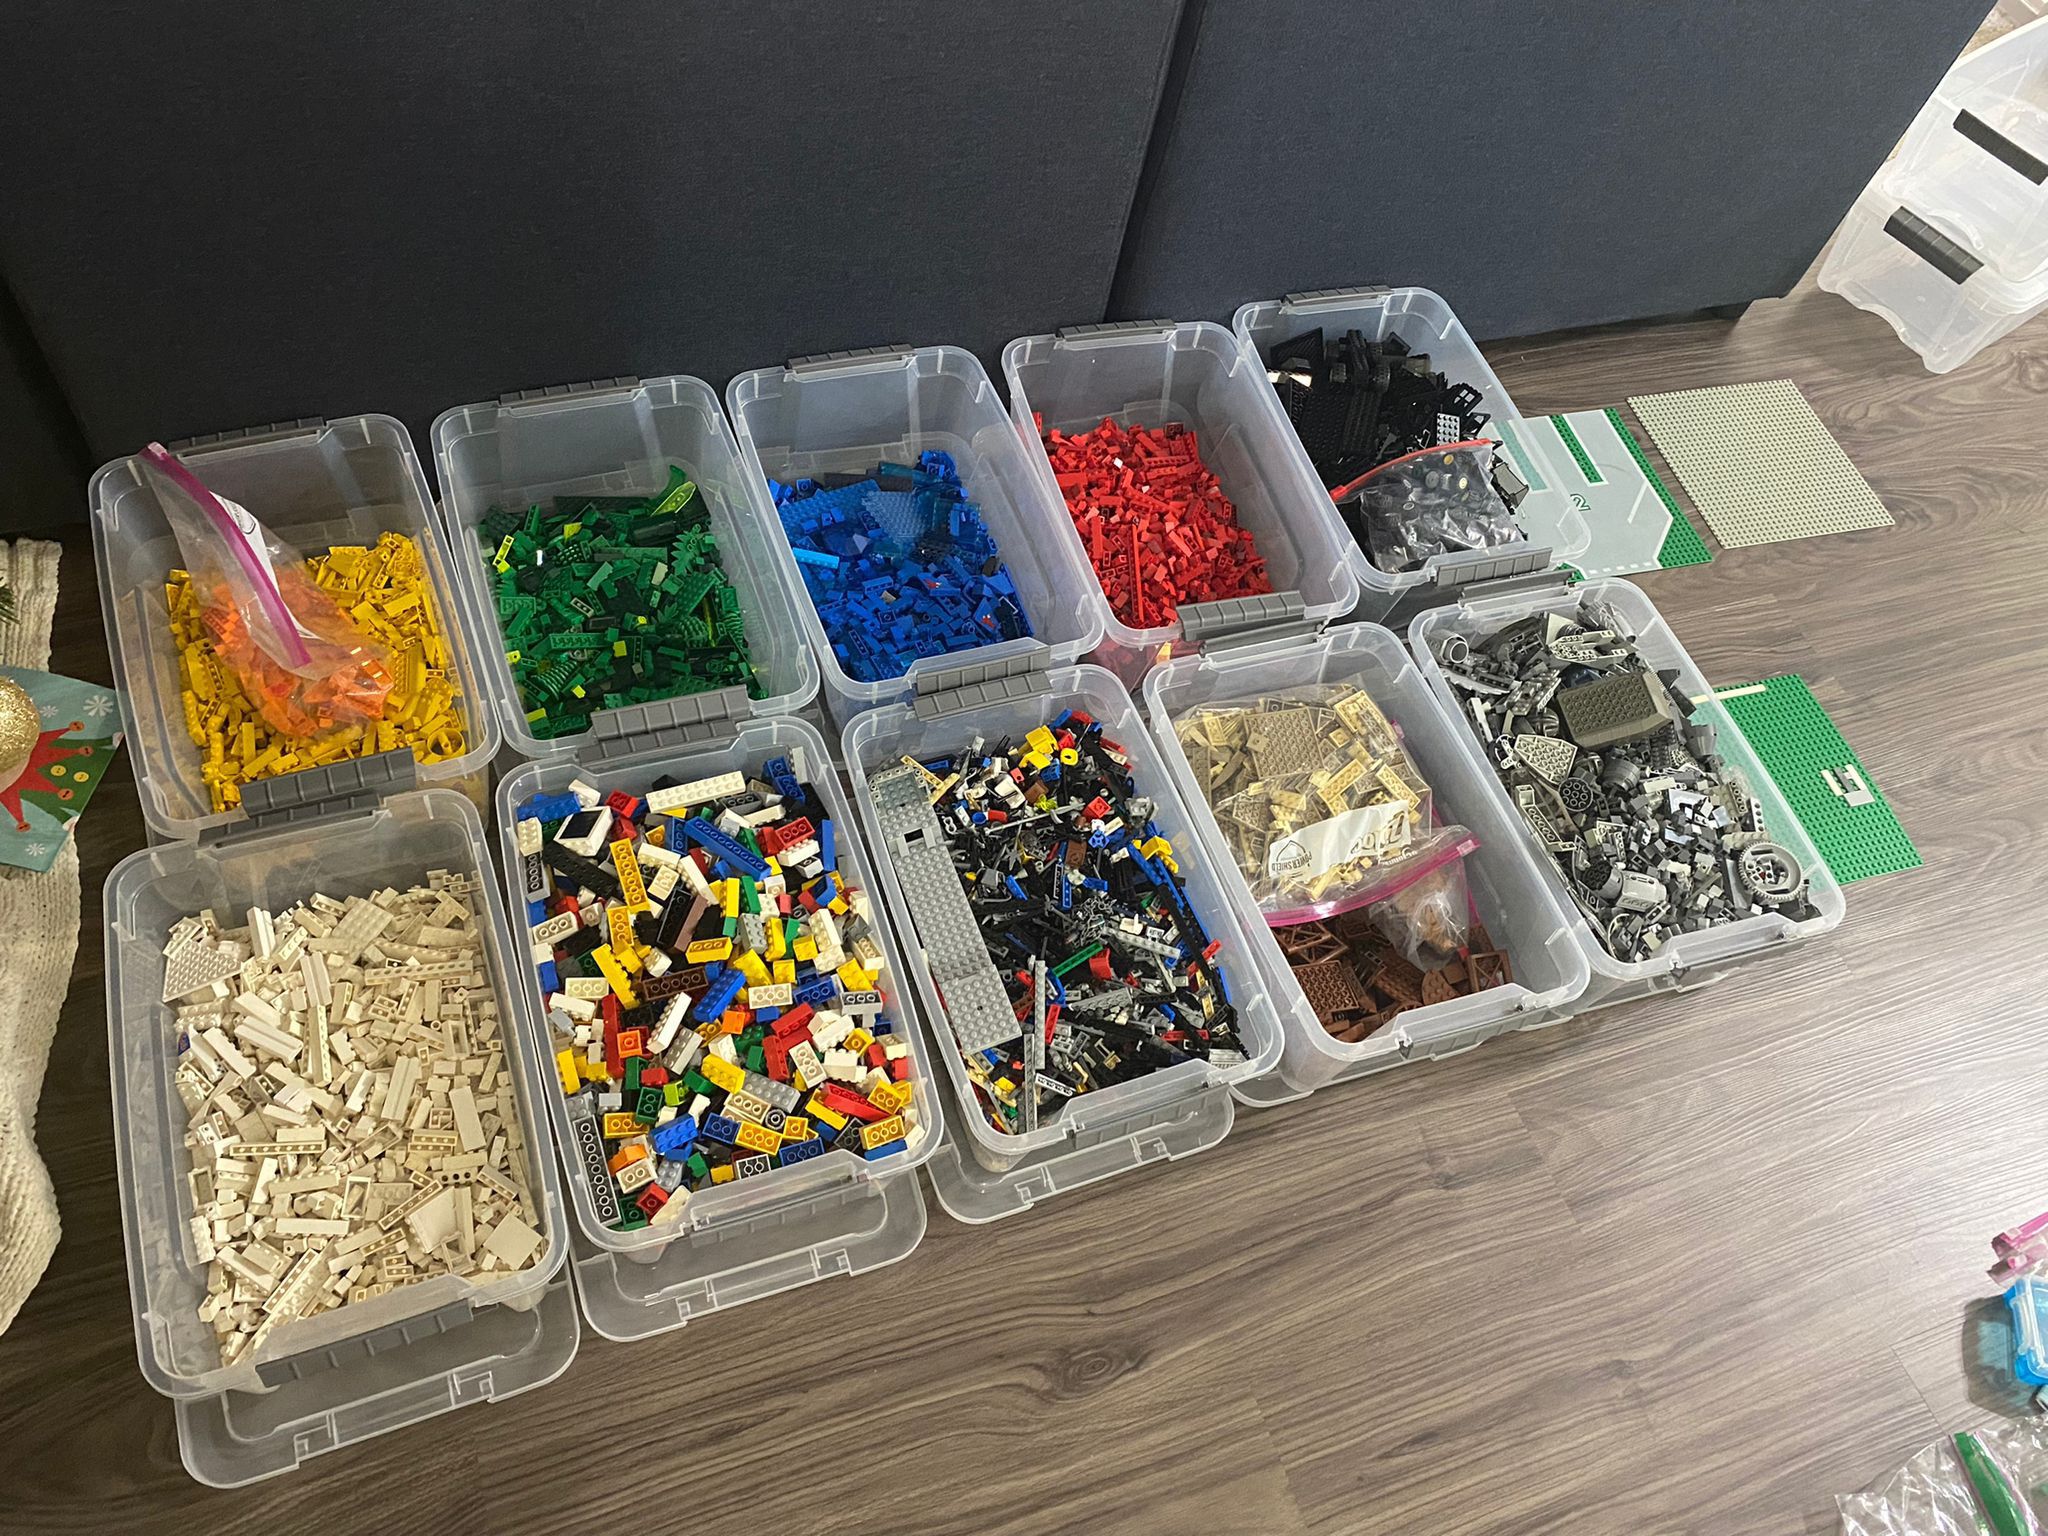 10 boxes of Lego parts